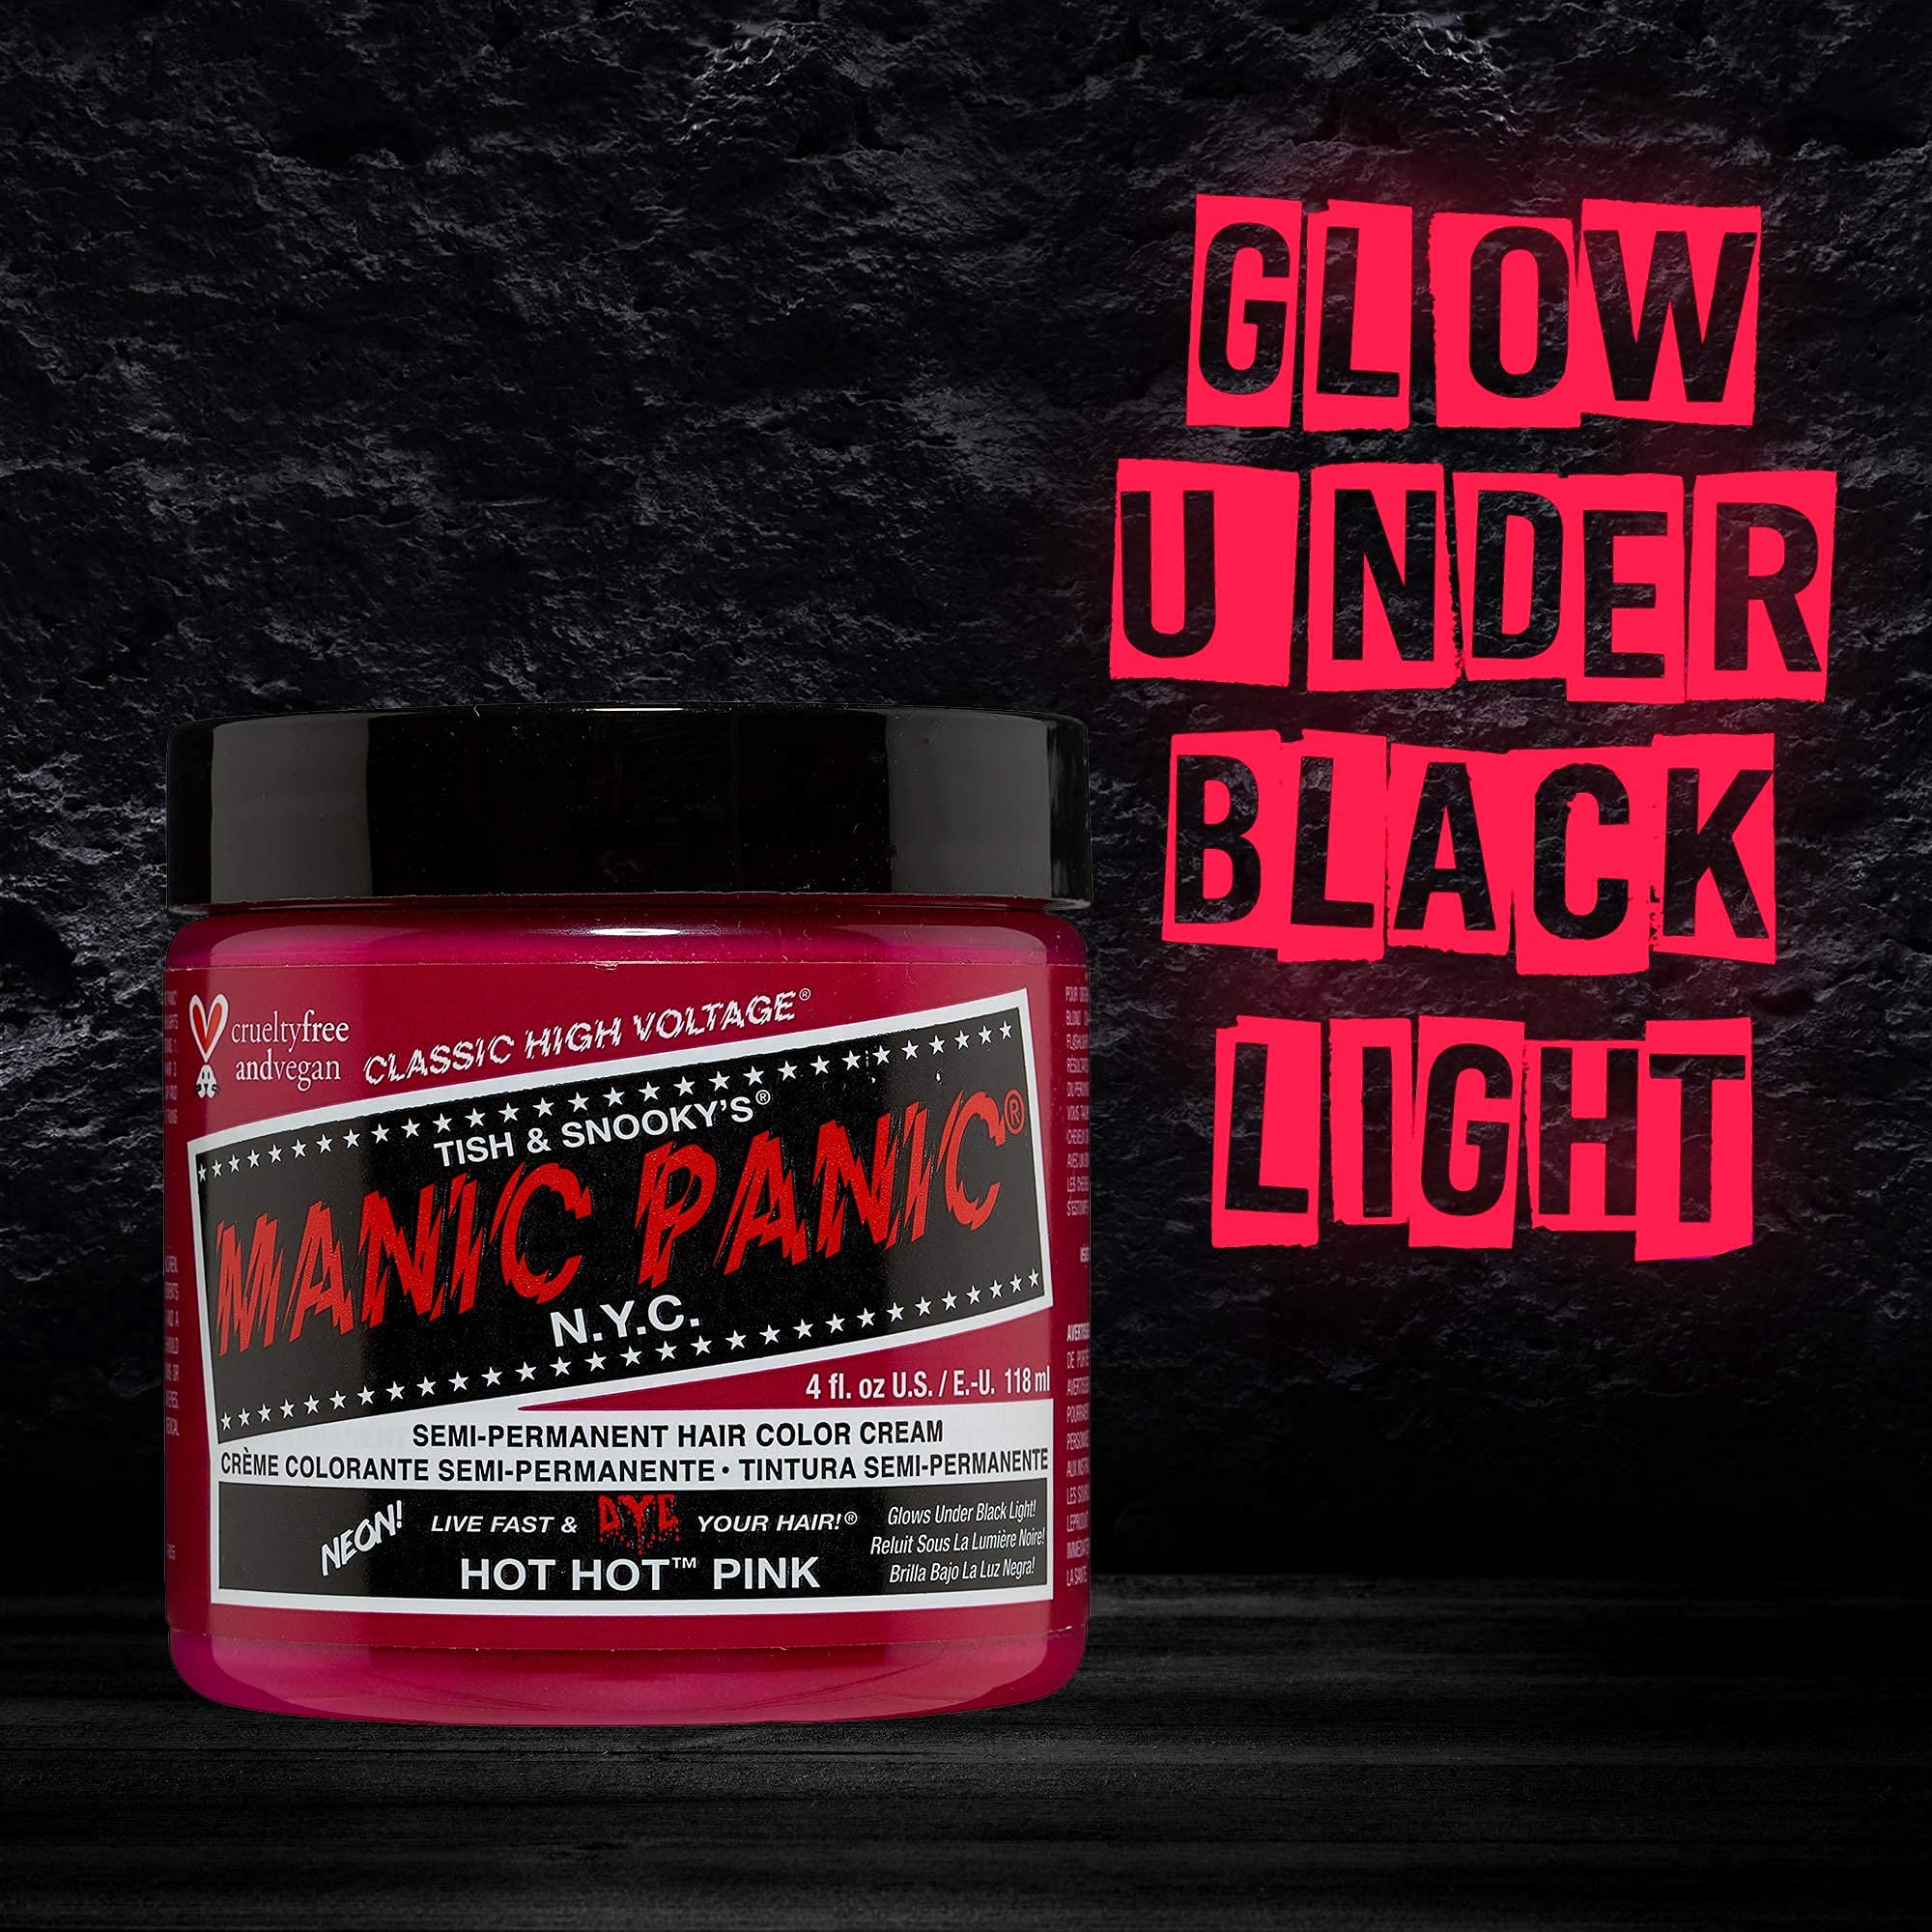 MANIC PANIC Hot Hot Pink Bundle with Electric Lizard Green, Atomic Turquoise, Psychedelic Sunset Neon Orange and Sunshine Yellow Hair Dye